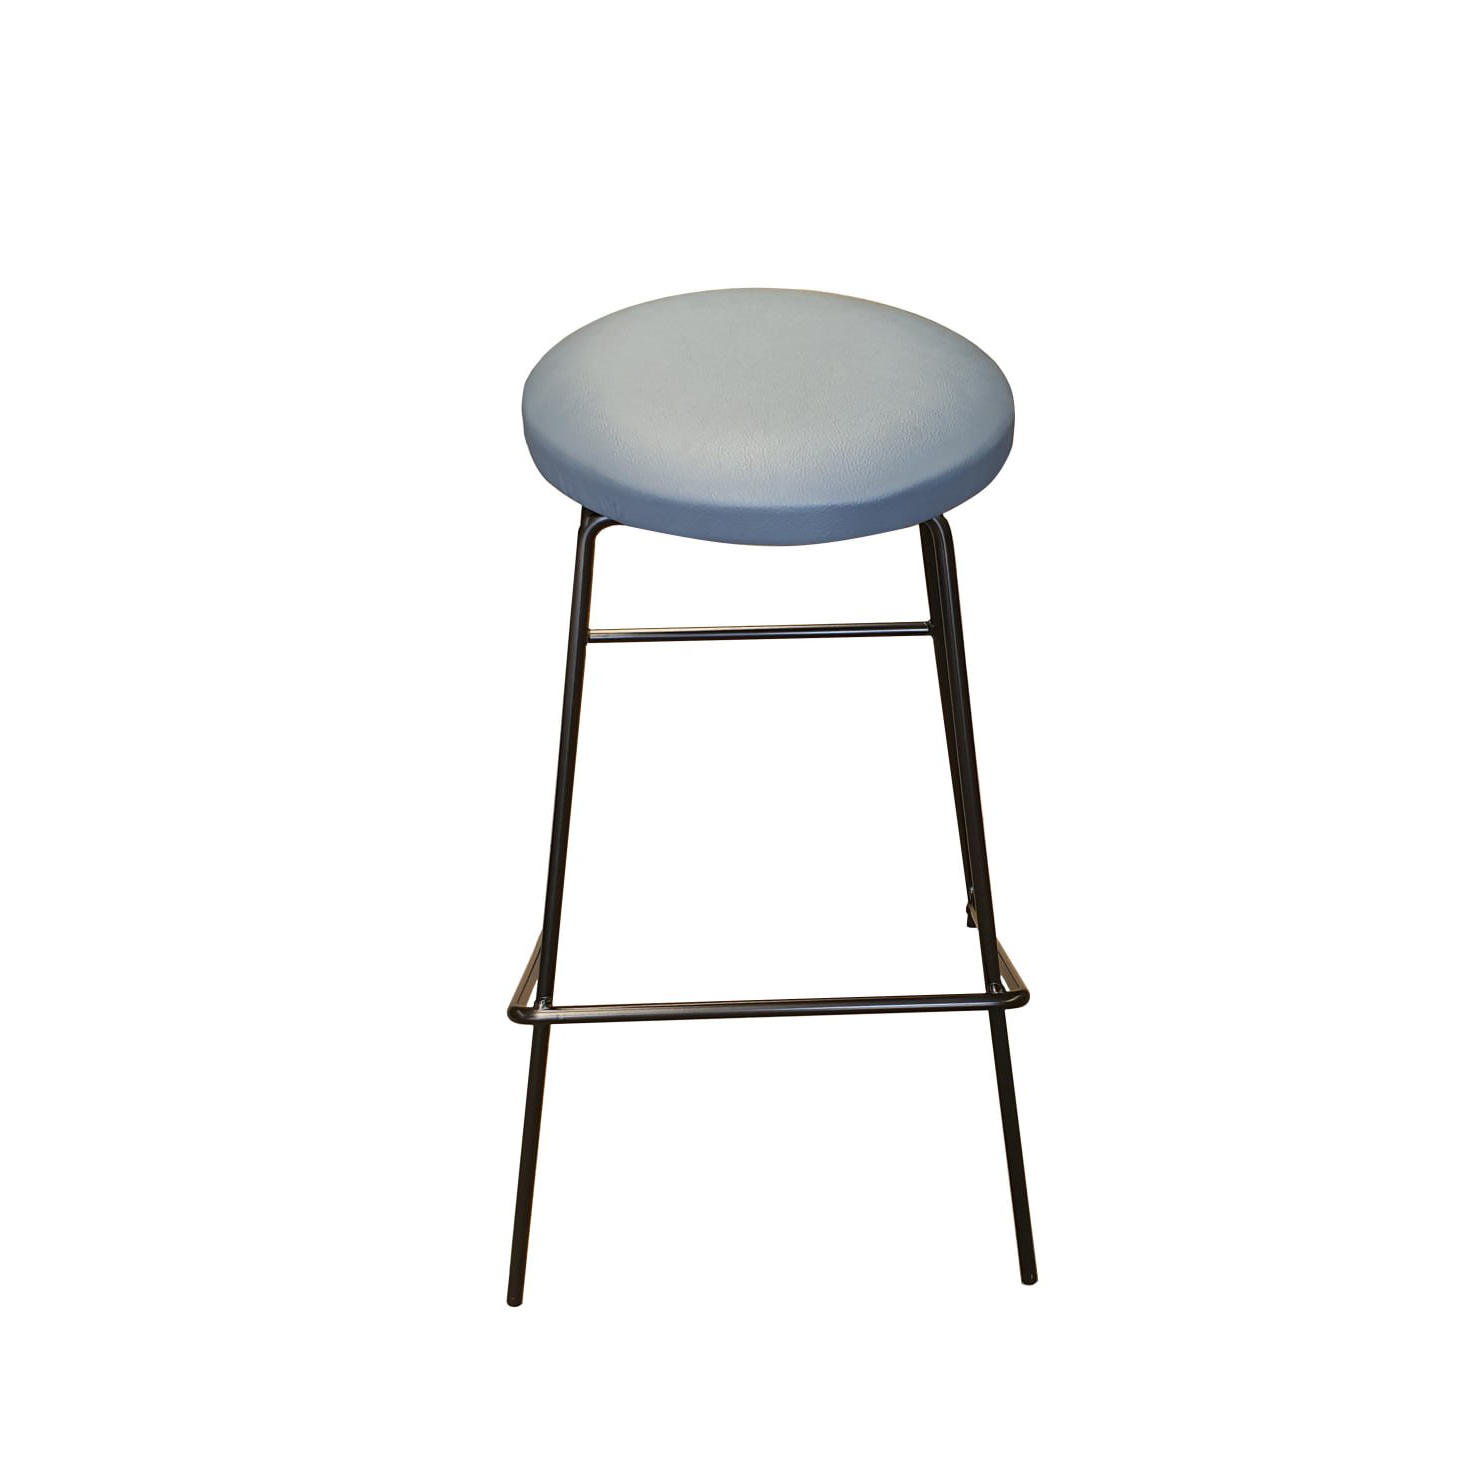 Modern B-16 Wire Stool Upholstered Powder Coated Satin Blac